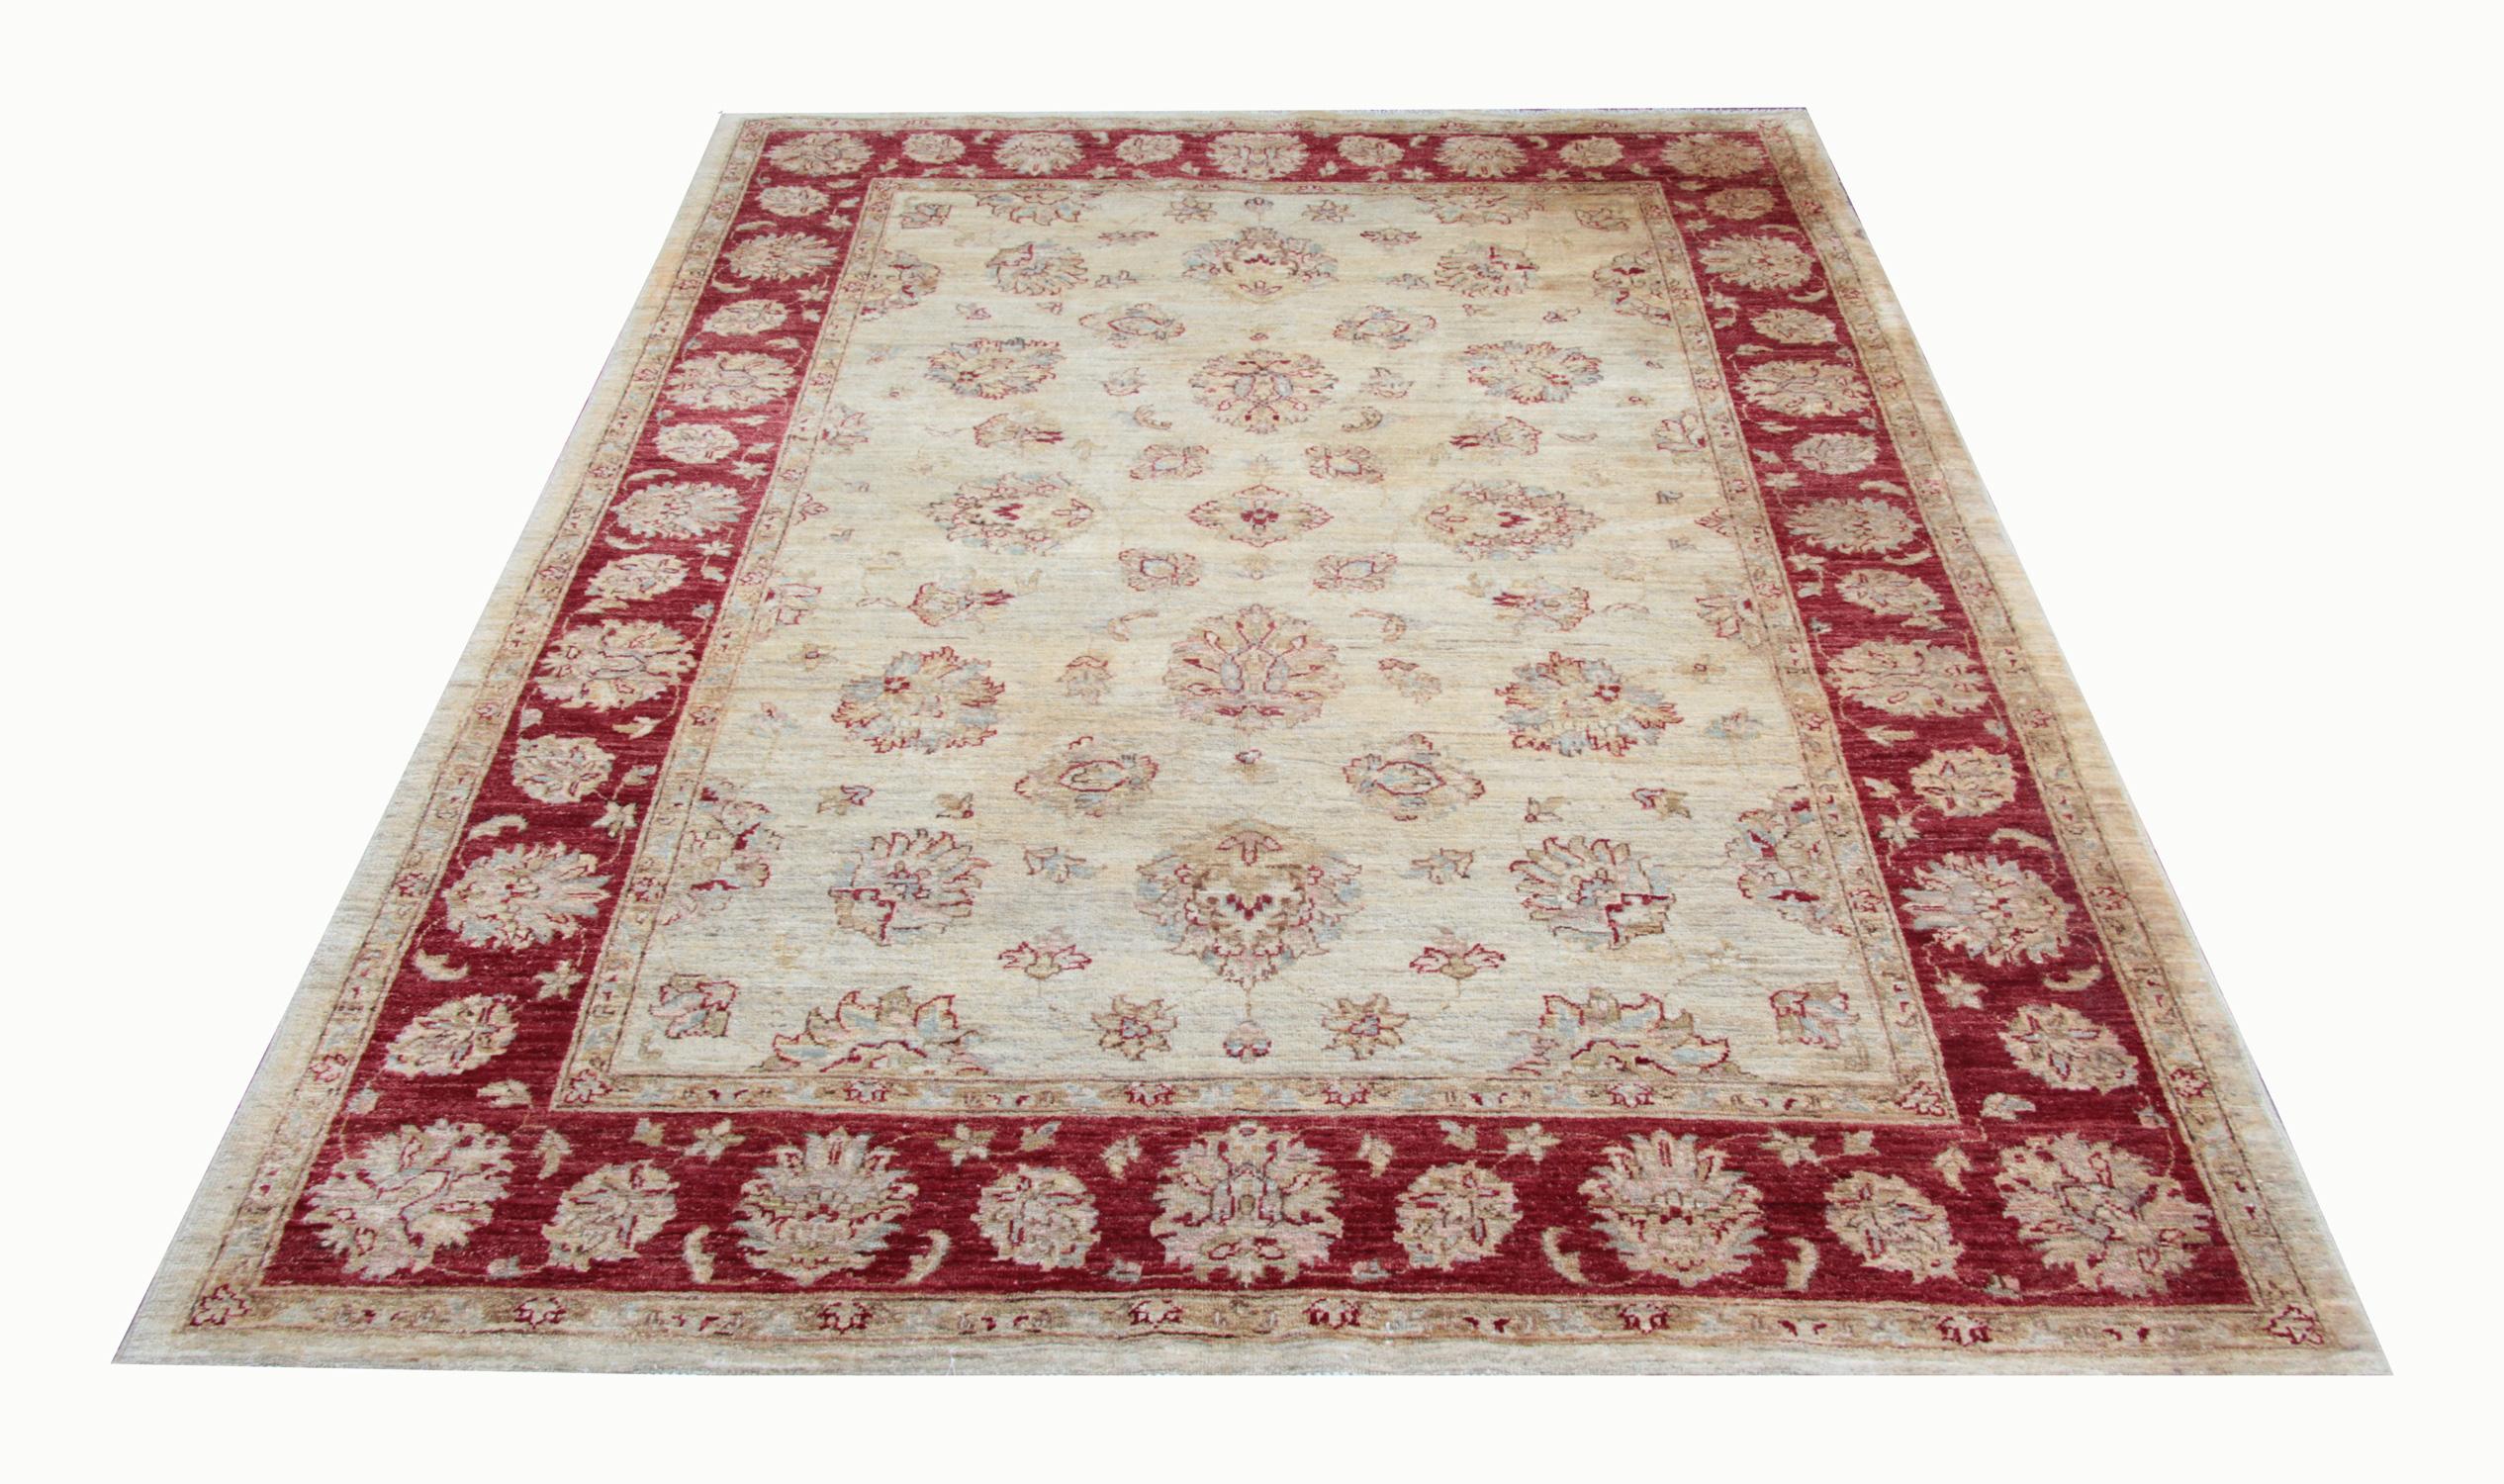 This golden white rug with a magnificent red border is a Ziegler Sultanabad woven rug made on our looms by our master weavers in Afghanistan. These handmade rugs are woven with all natural veg dyes and all handspun wool. The large rug scale design